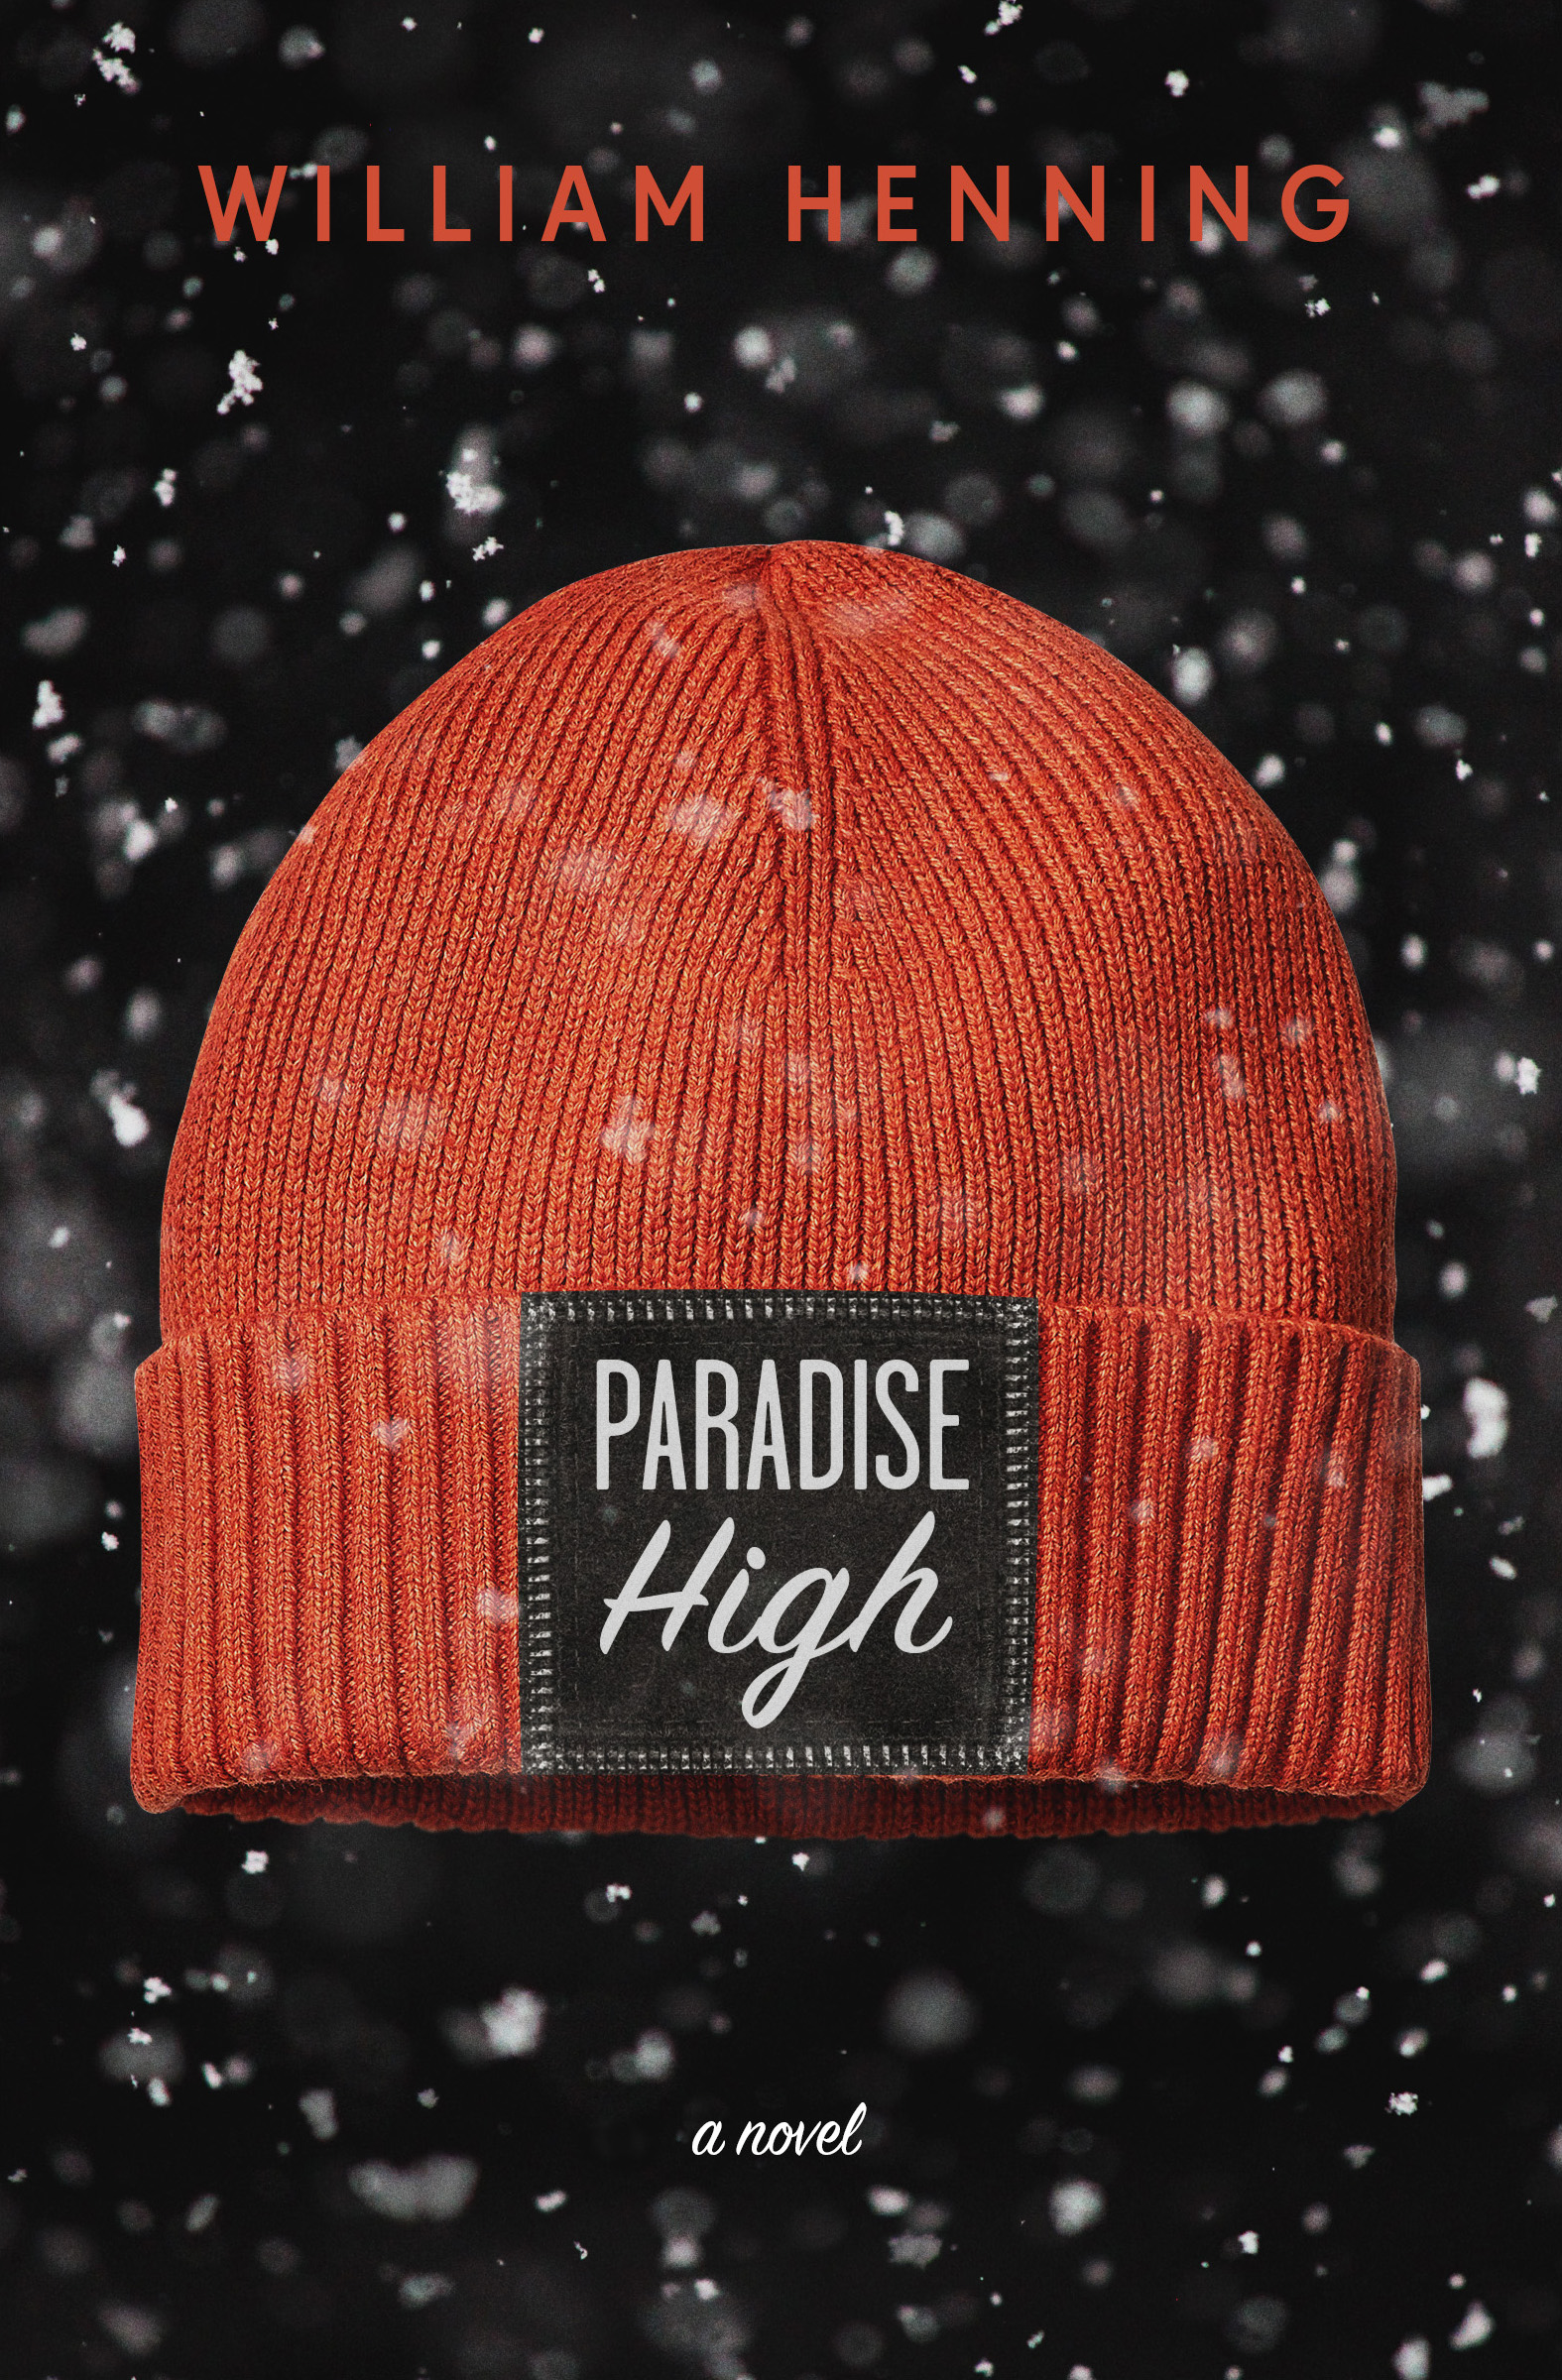 FREE: Paradise High: A Novel by William Henning